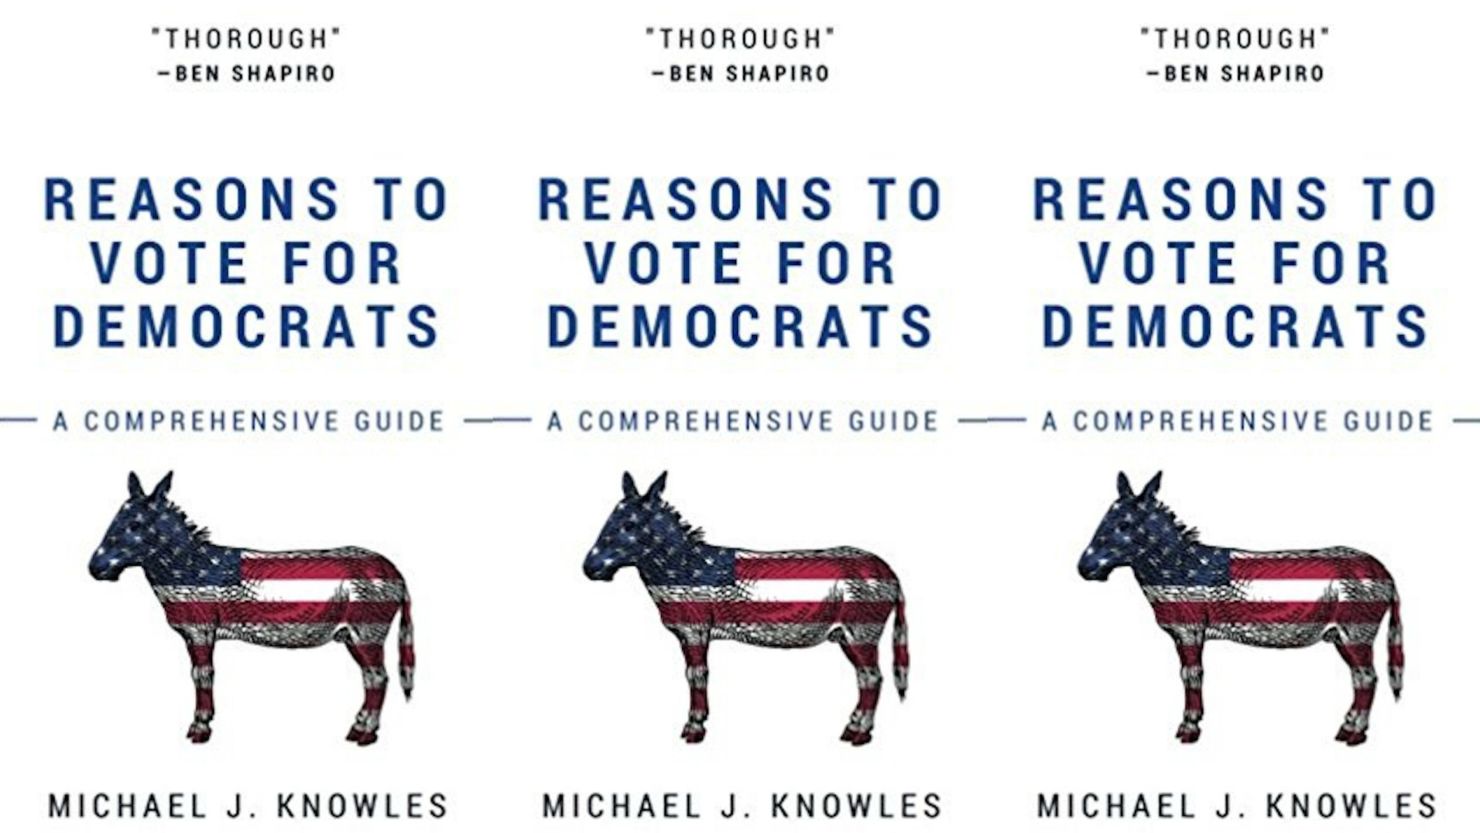 Michael J. Knowles' self-published book "Reasons To Vote For Democrats" is the number 1 book on Amazon's best sellers list